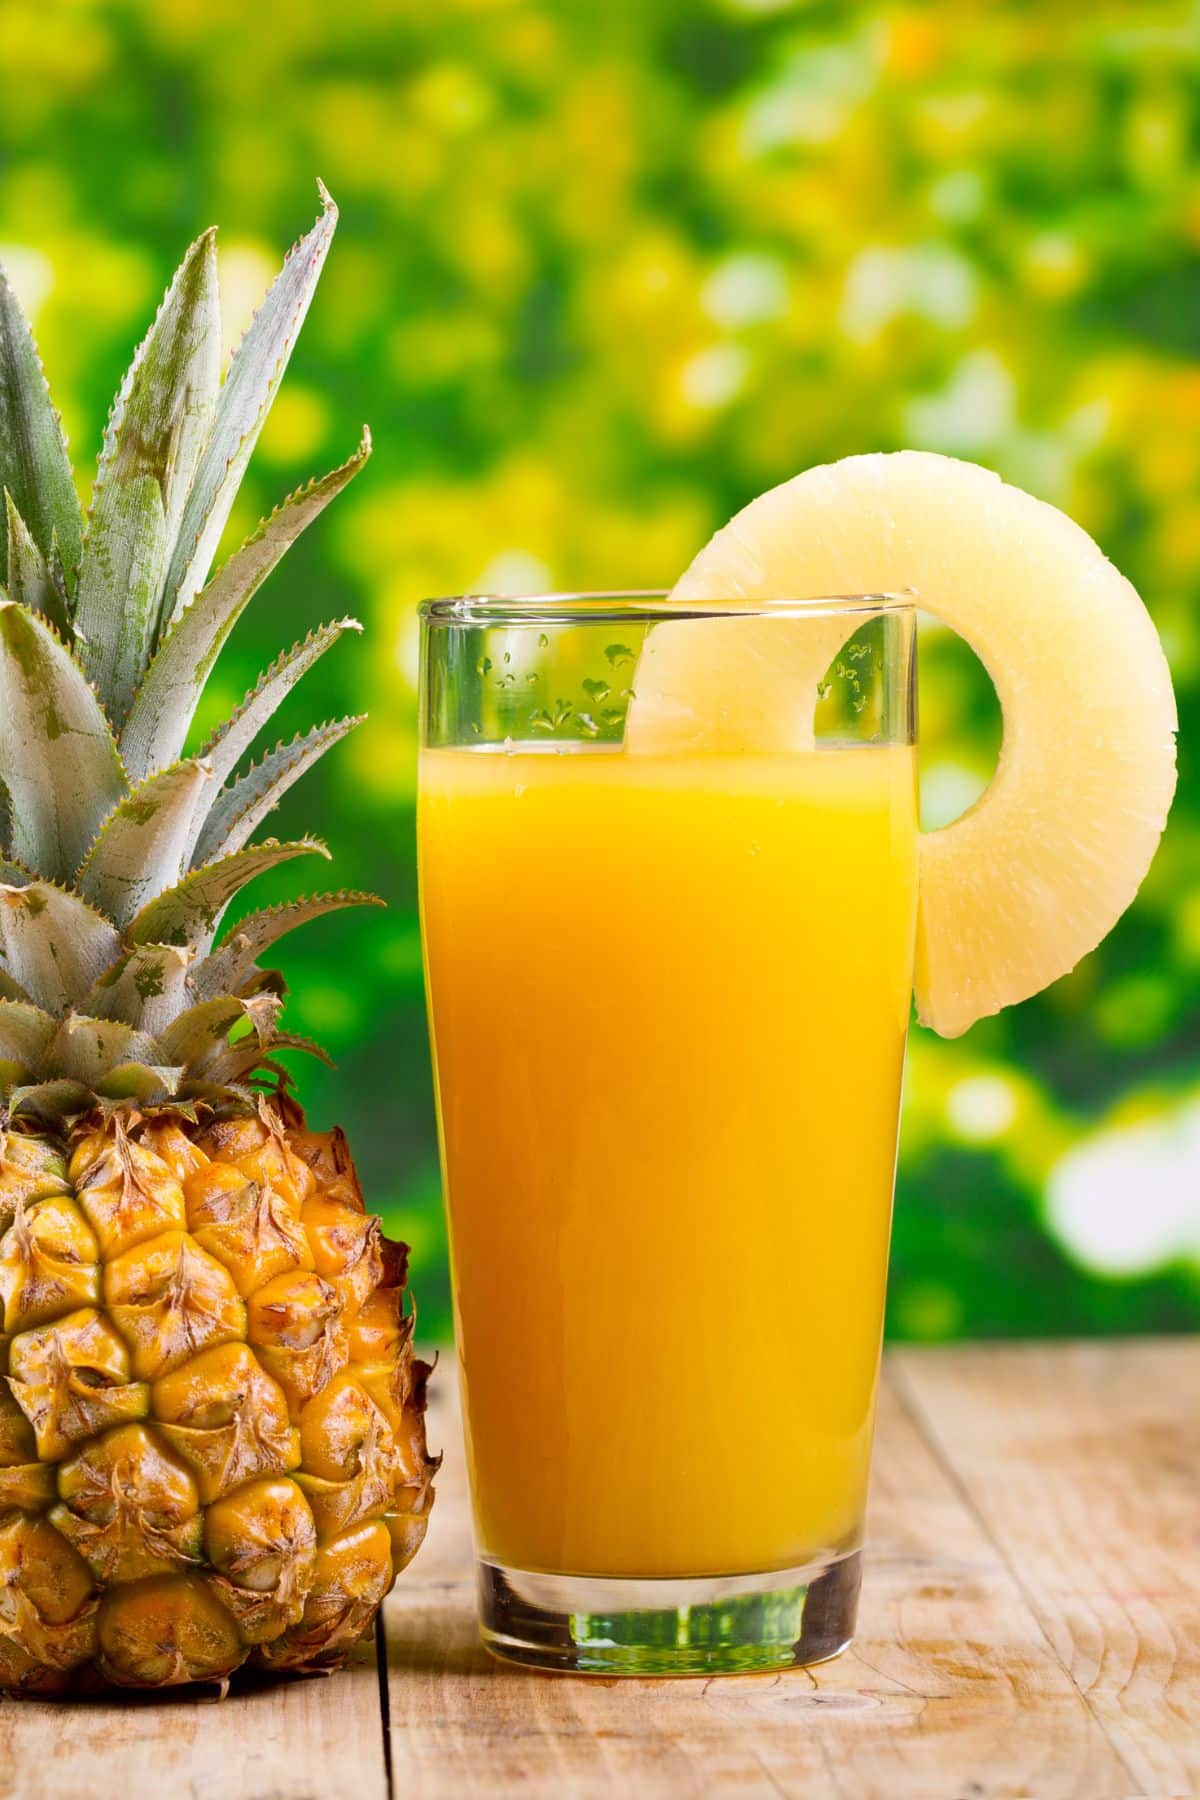 a glass of pineapple juice next to a whole pineapple.